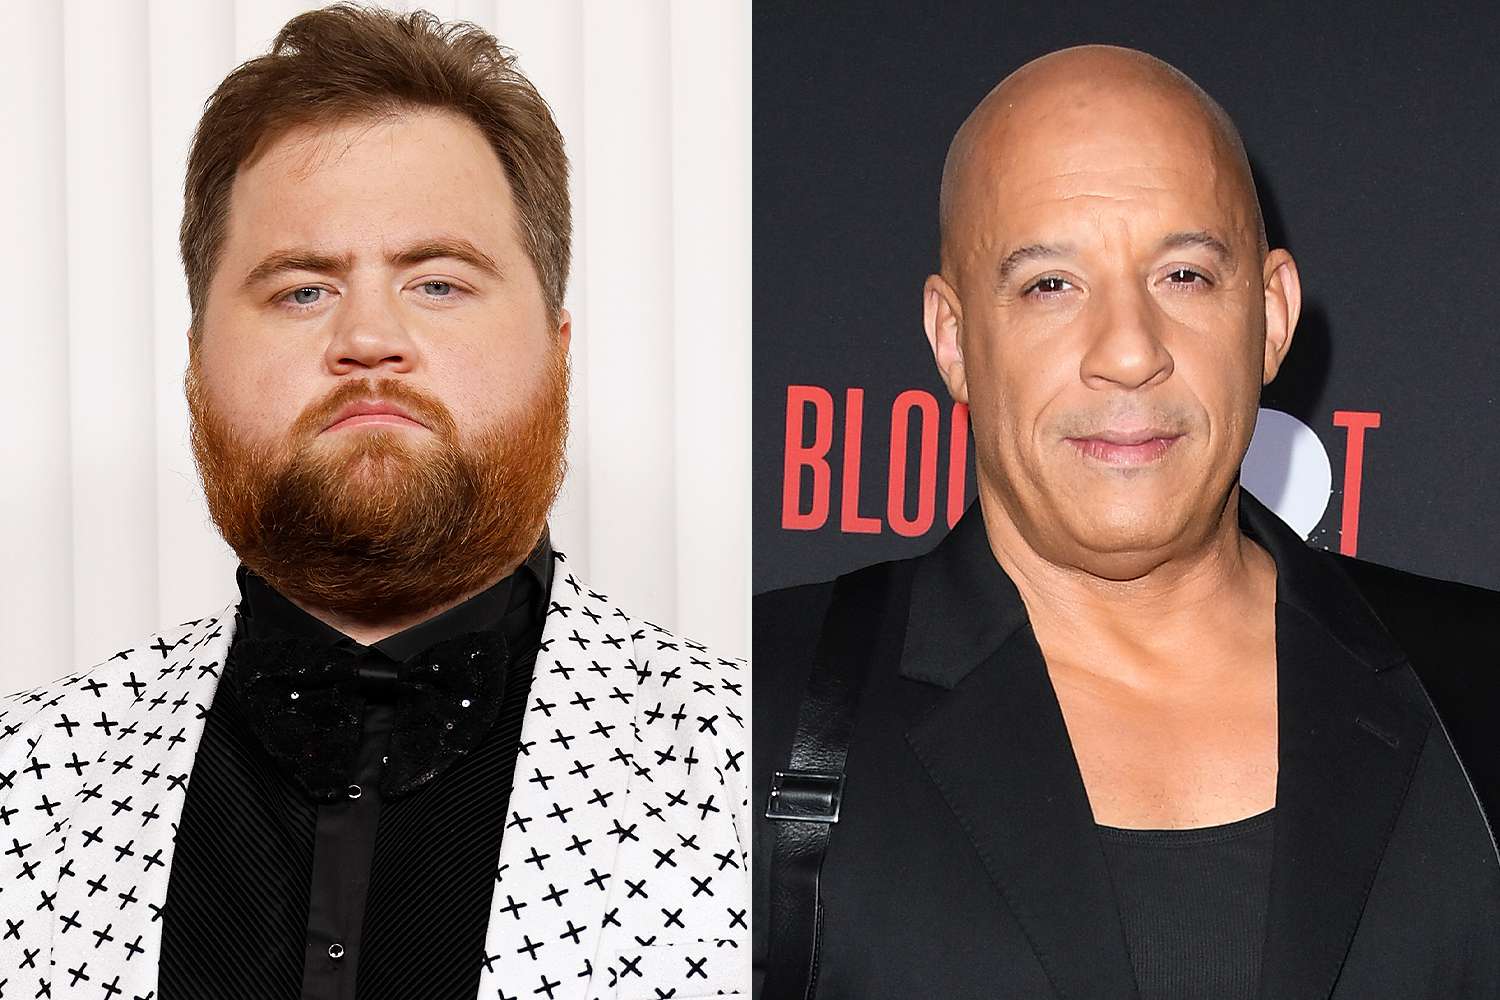 Paul Walter Hauser Says He's 'Genuinely Sorry' for Viral Vin Diesel Comments: 'I No Longer Feel That Way'